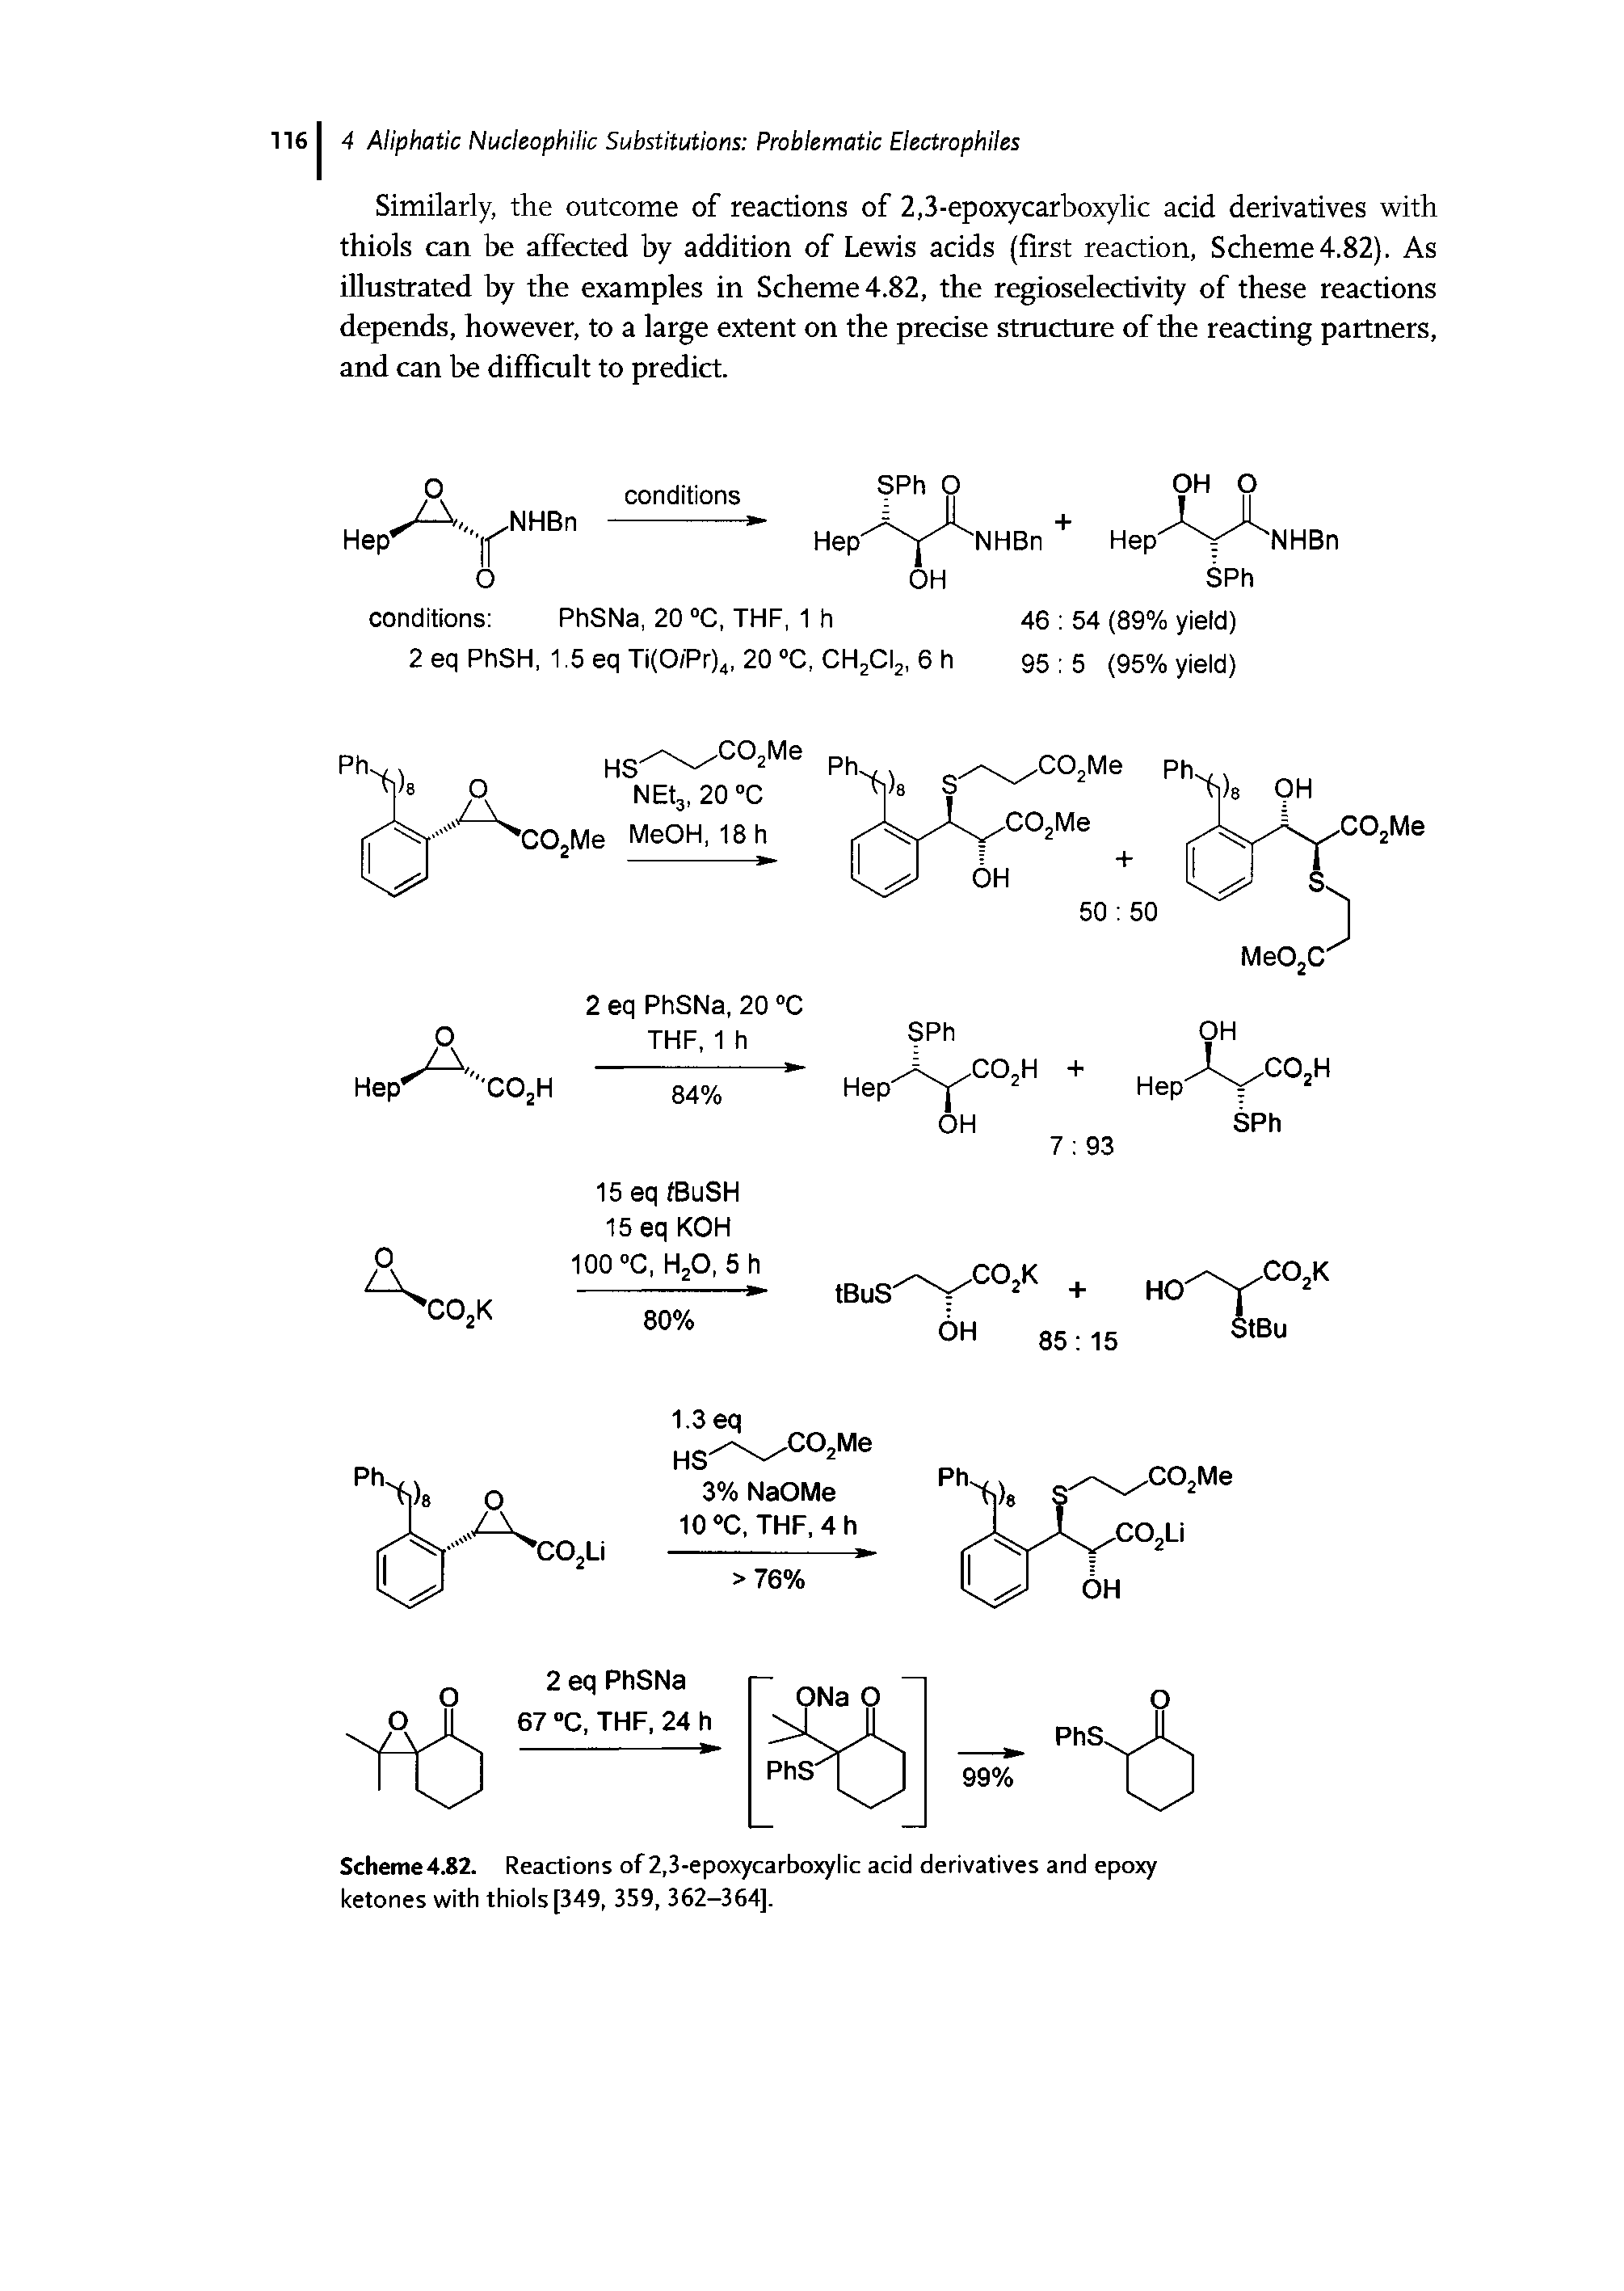 Scheme4.82. Reactions of 2,3-epoxycarboxylic acid derivatives and epoxy ketones with thiols [349, 359, 362—364].